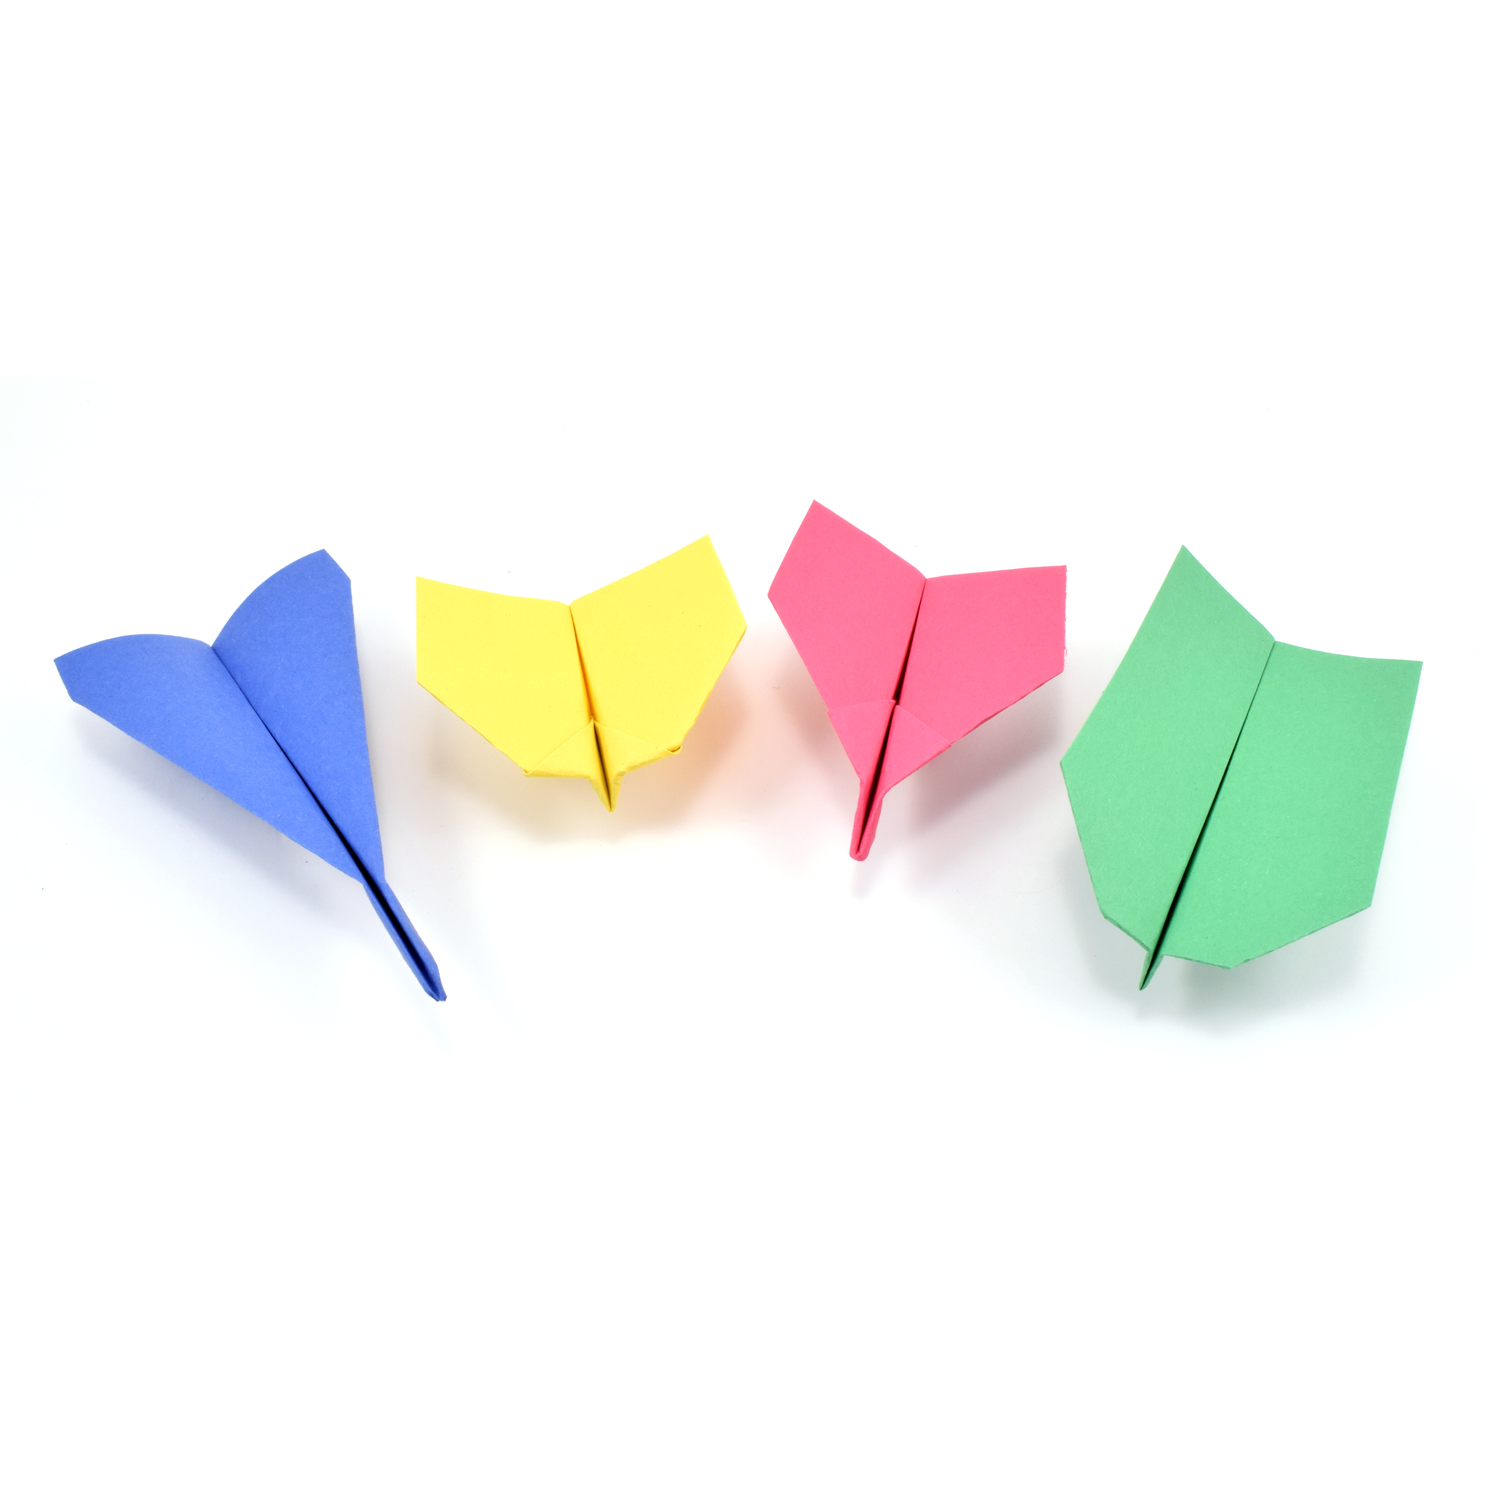 Four paper airplanes - STEM Calendar For Educators: Month By Month STEM Projects